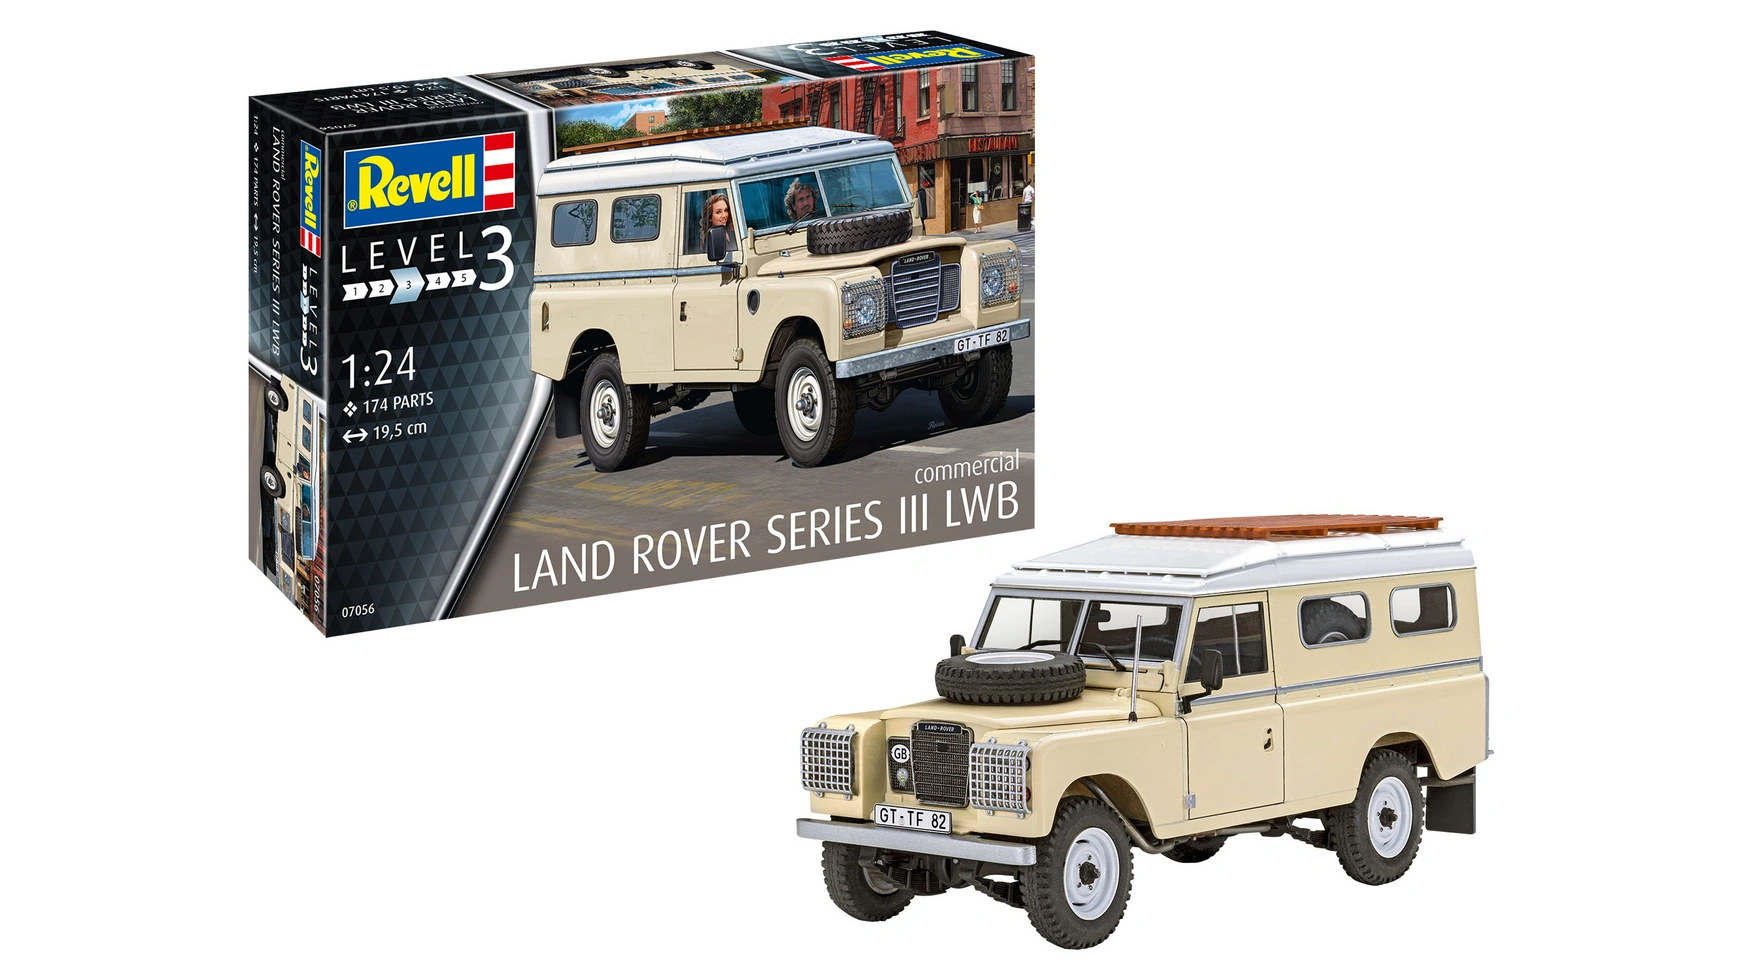 Revell Land Rover Series III LWB (коммерческий) new 1 24 land rover defender suv toy alloy car diecasts